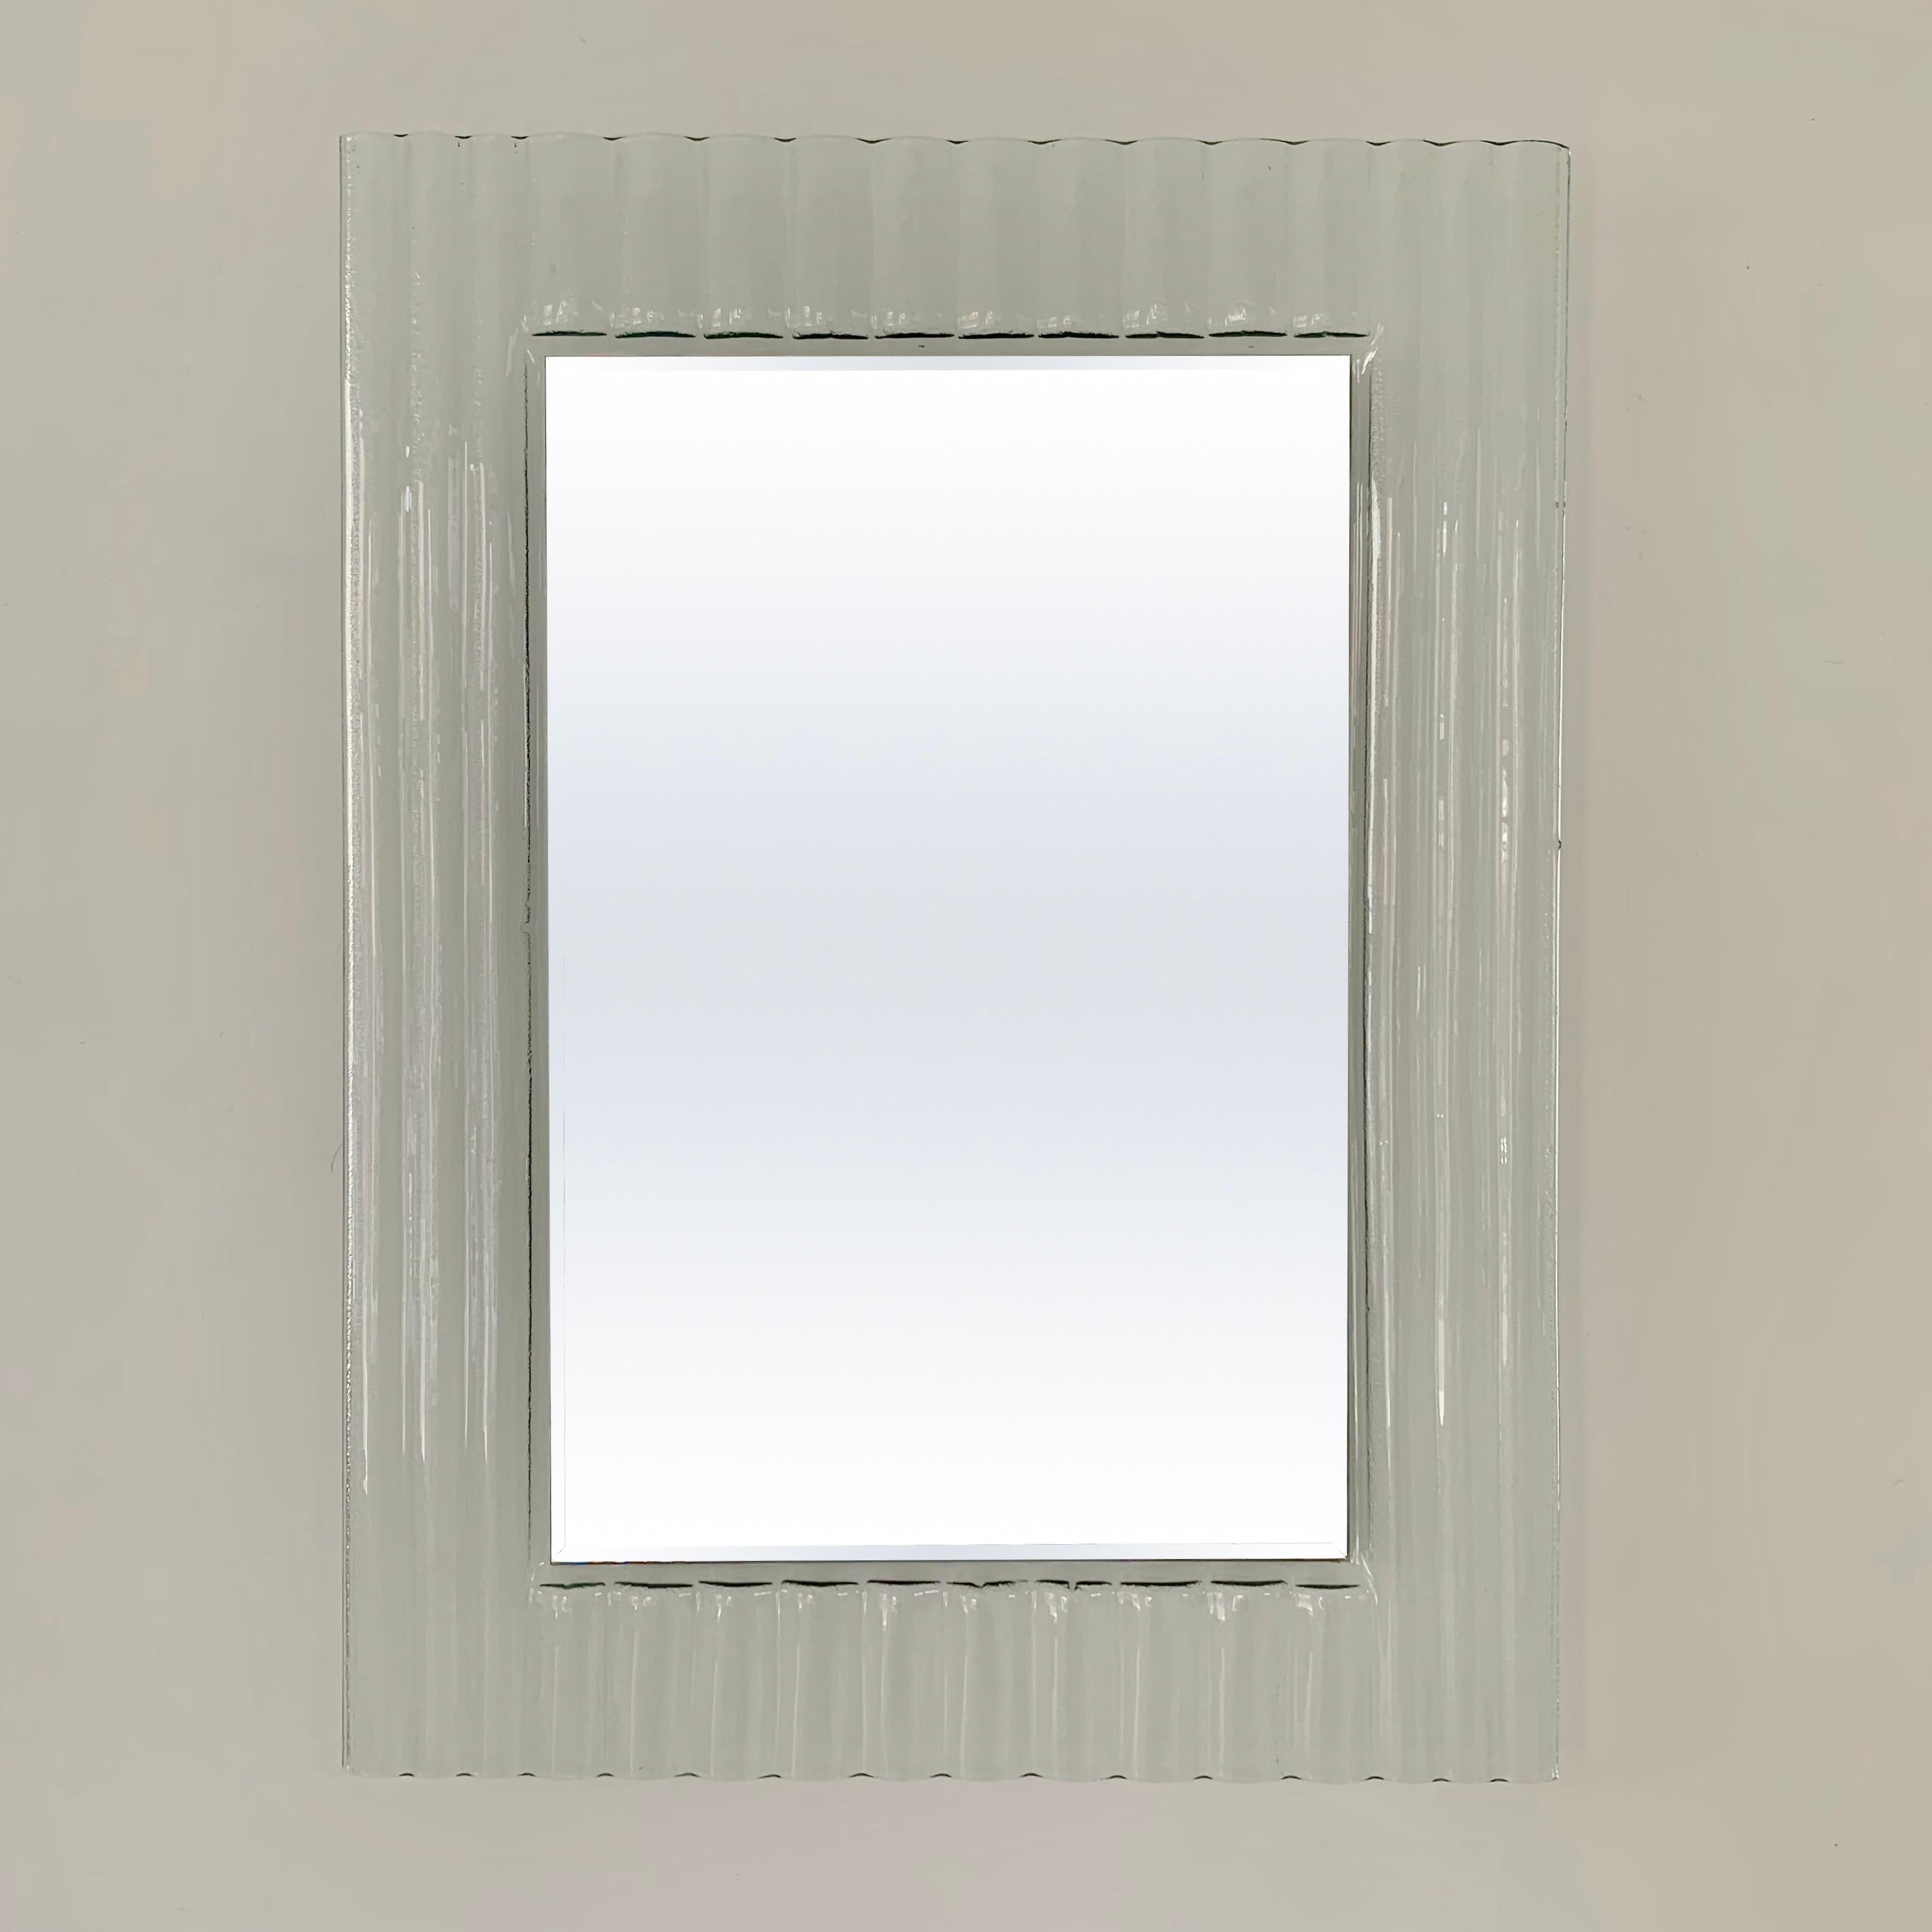 Elegant italian rectangular mirror, circa 1980, Italy.
Ripple effect Murano glass.
Ron Arad Design attribution.
Dimensions: 80 cm H, 60 cm W, 3 cm D.
Good original condition, no cracks.
All purchases are covered by our Buyer Protection